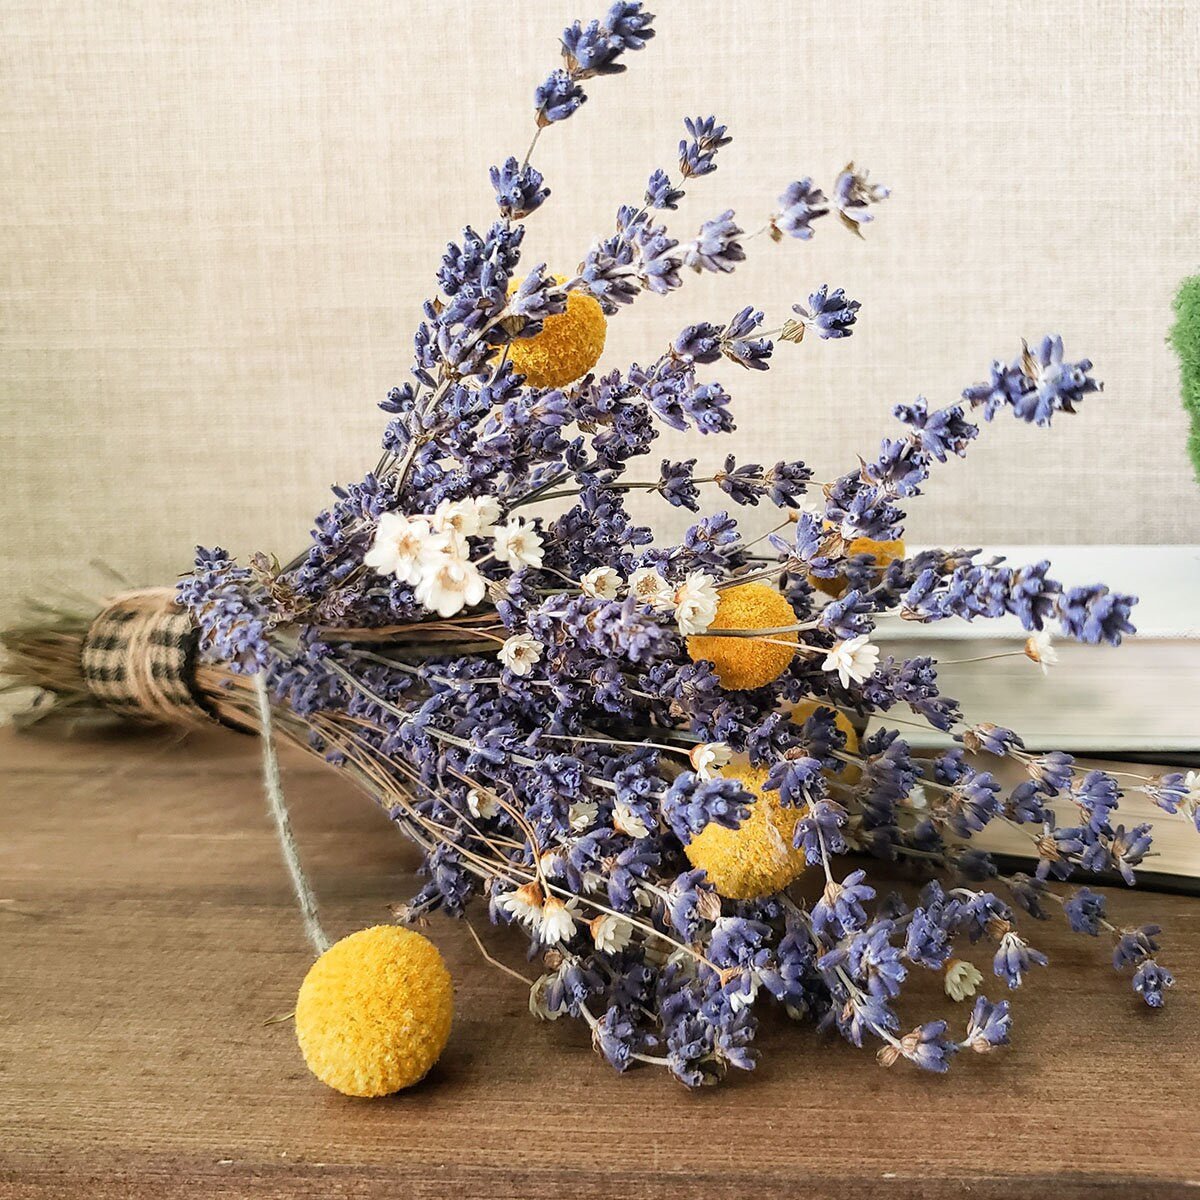 Small Dried Lavender Bouquet with Larkspur or Billy Balls